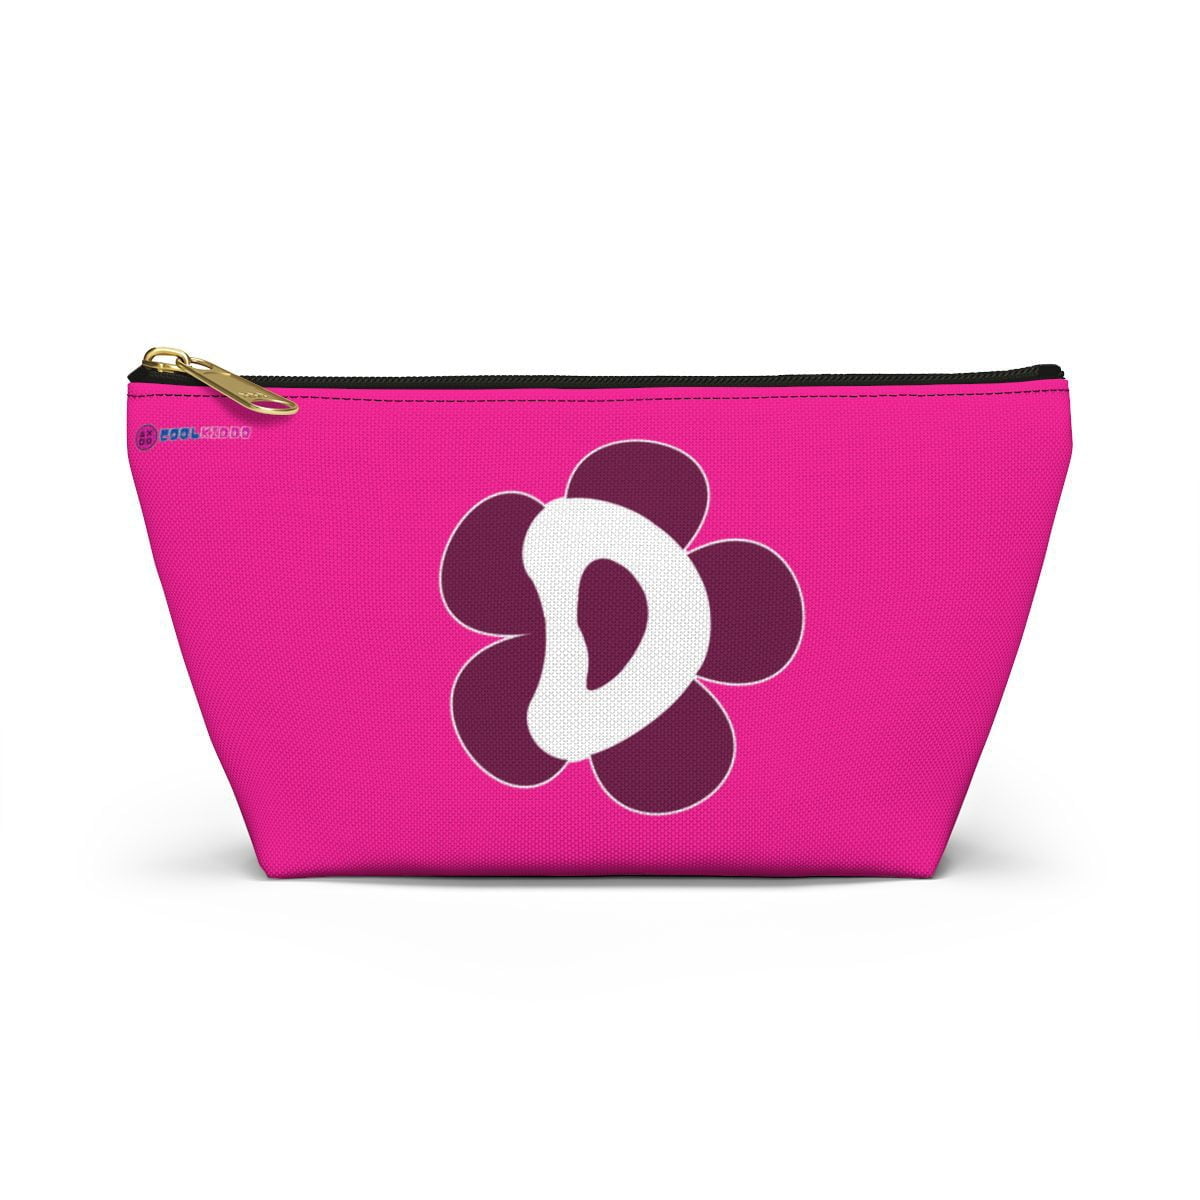 Love Diana Show YouTube Channel Accessory Pouch Cool Kiddo 22